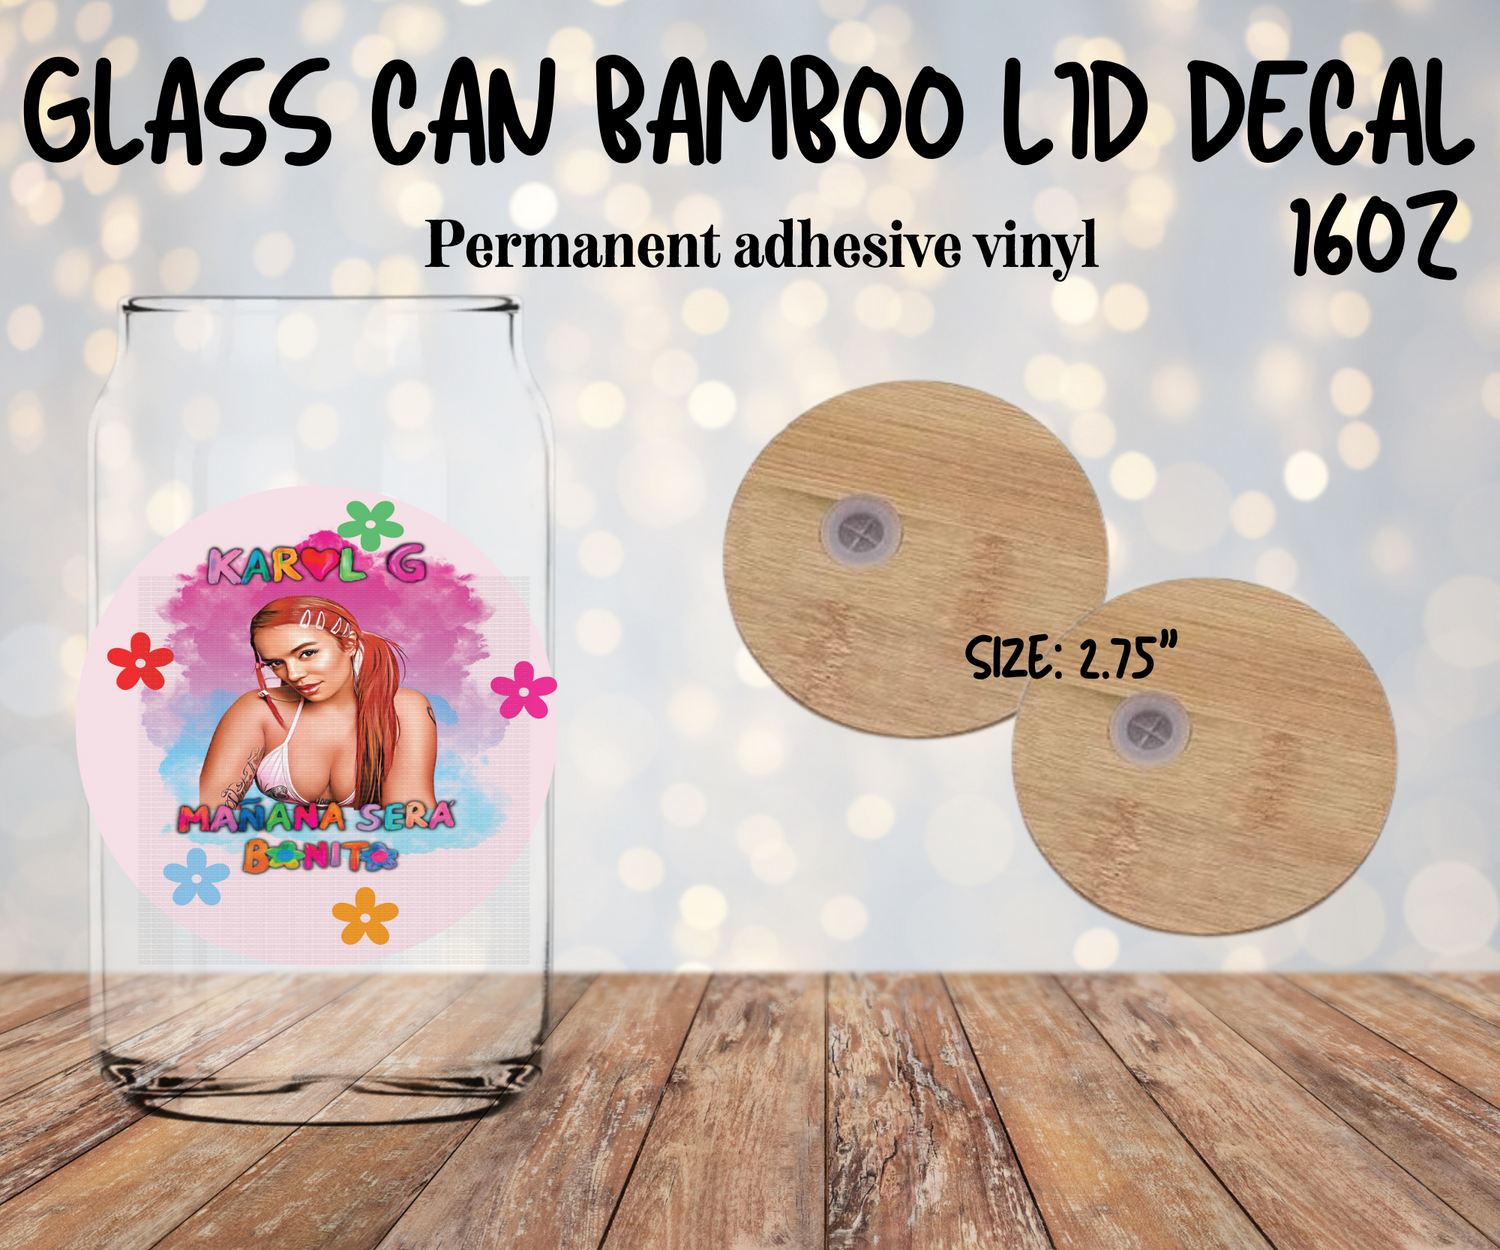 Bamboo Lid Decal 16oz